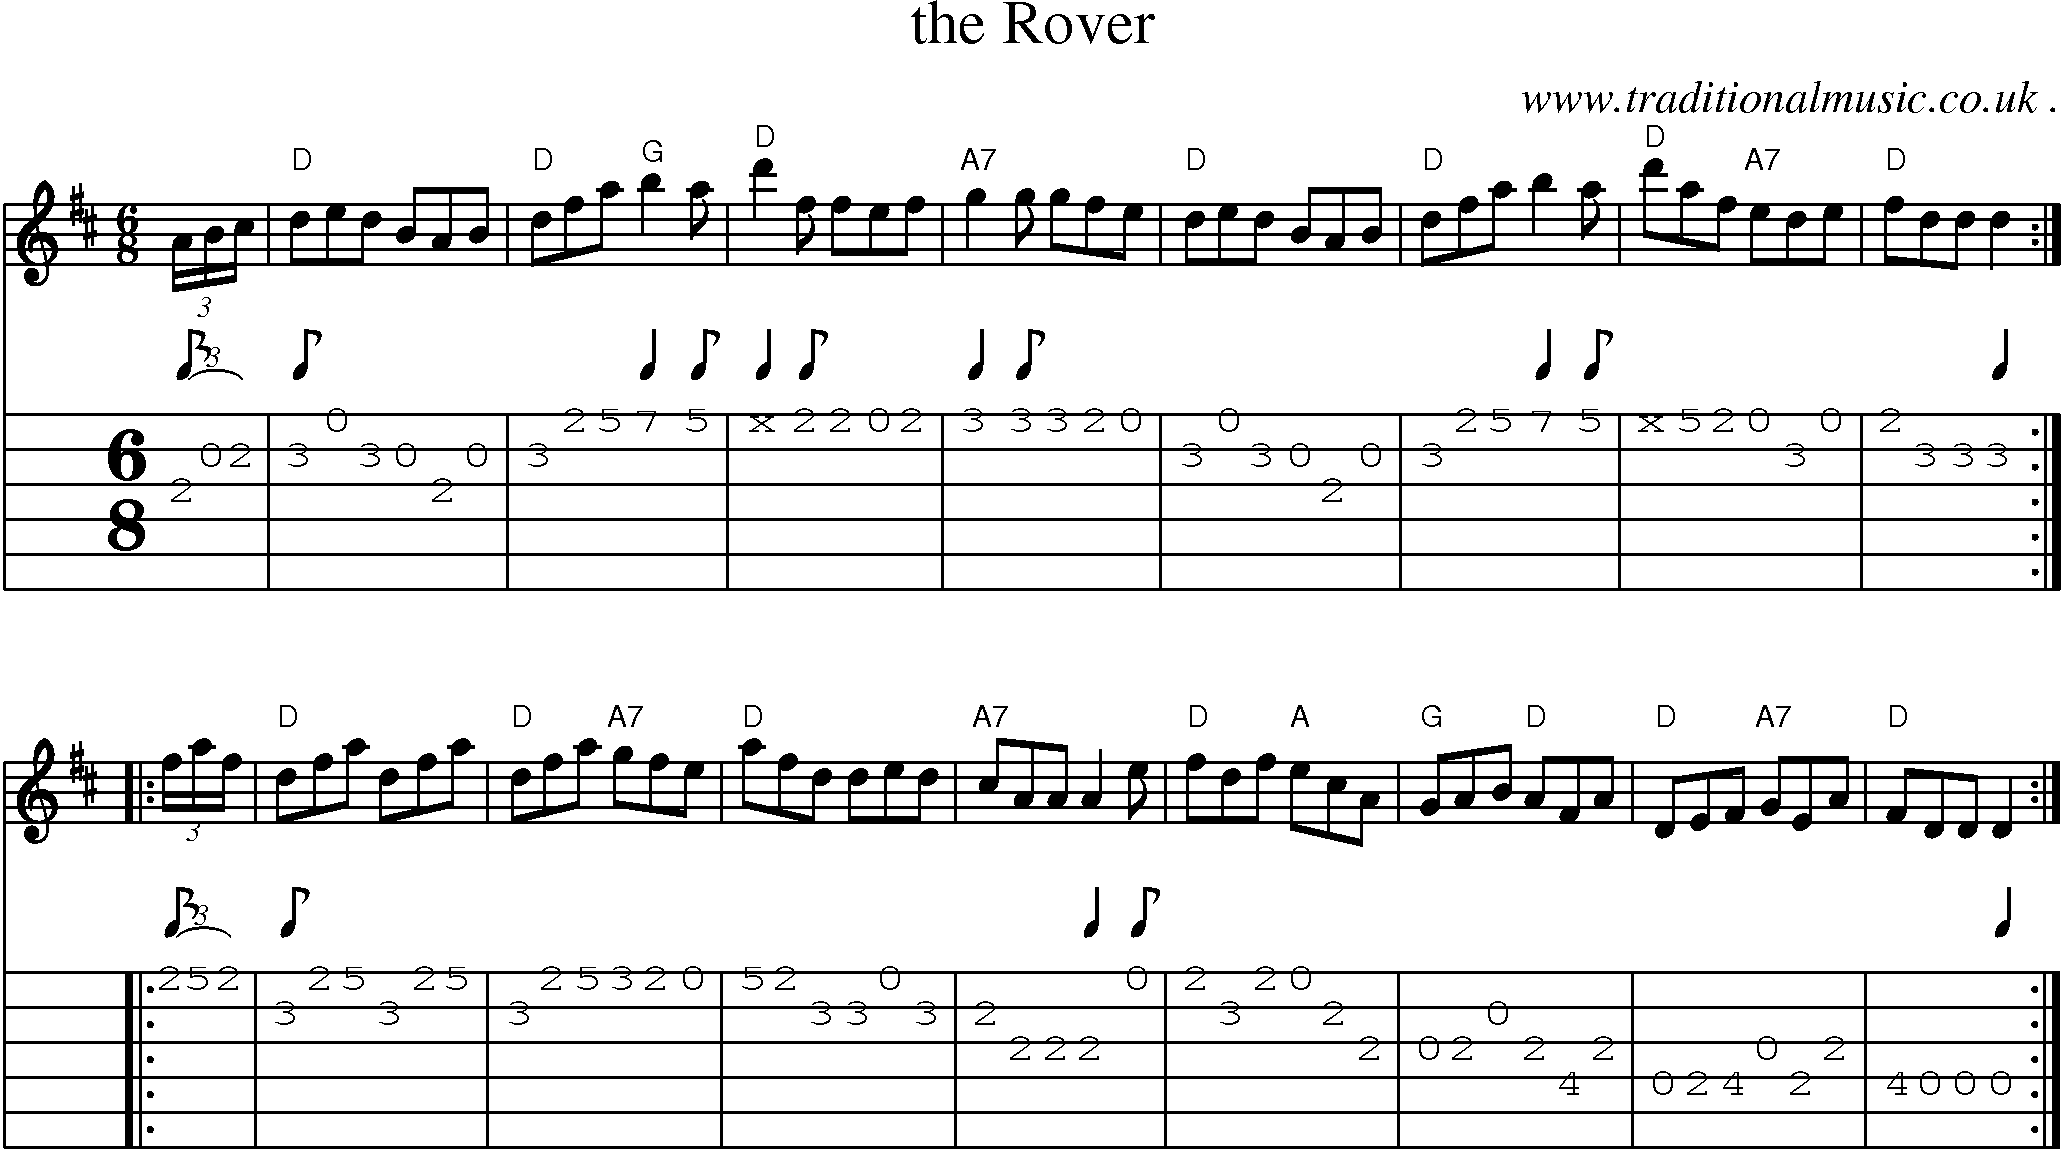 Sheet-music  score, Chords and Guitar Tabs for The Rover